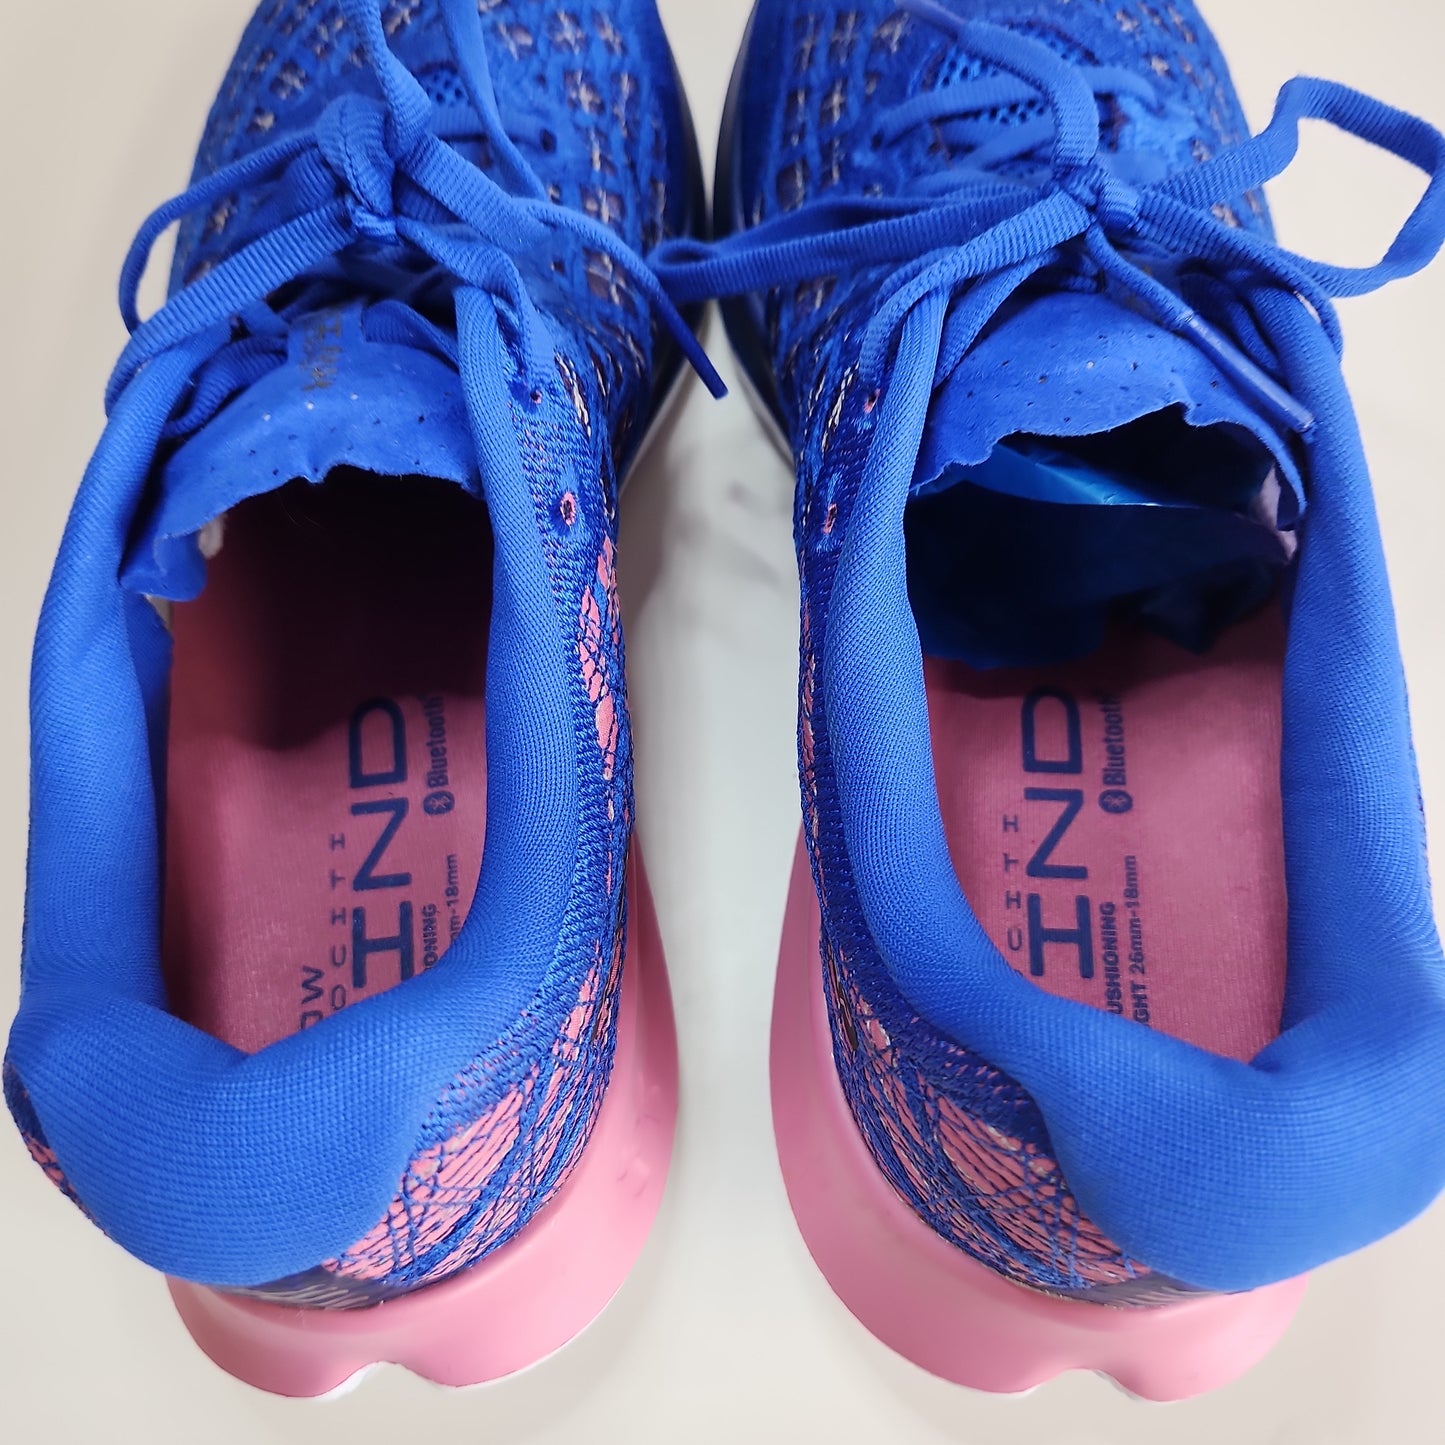 Under Armour Flow Velociti Wind 2 Running Shoes Blue/Pink - 11